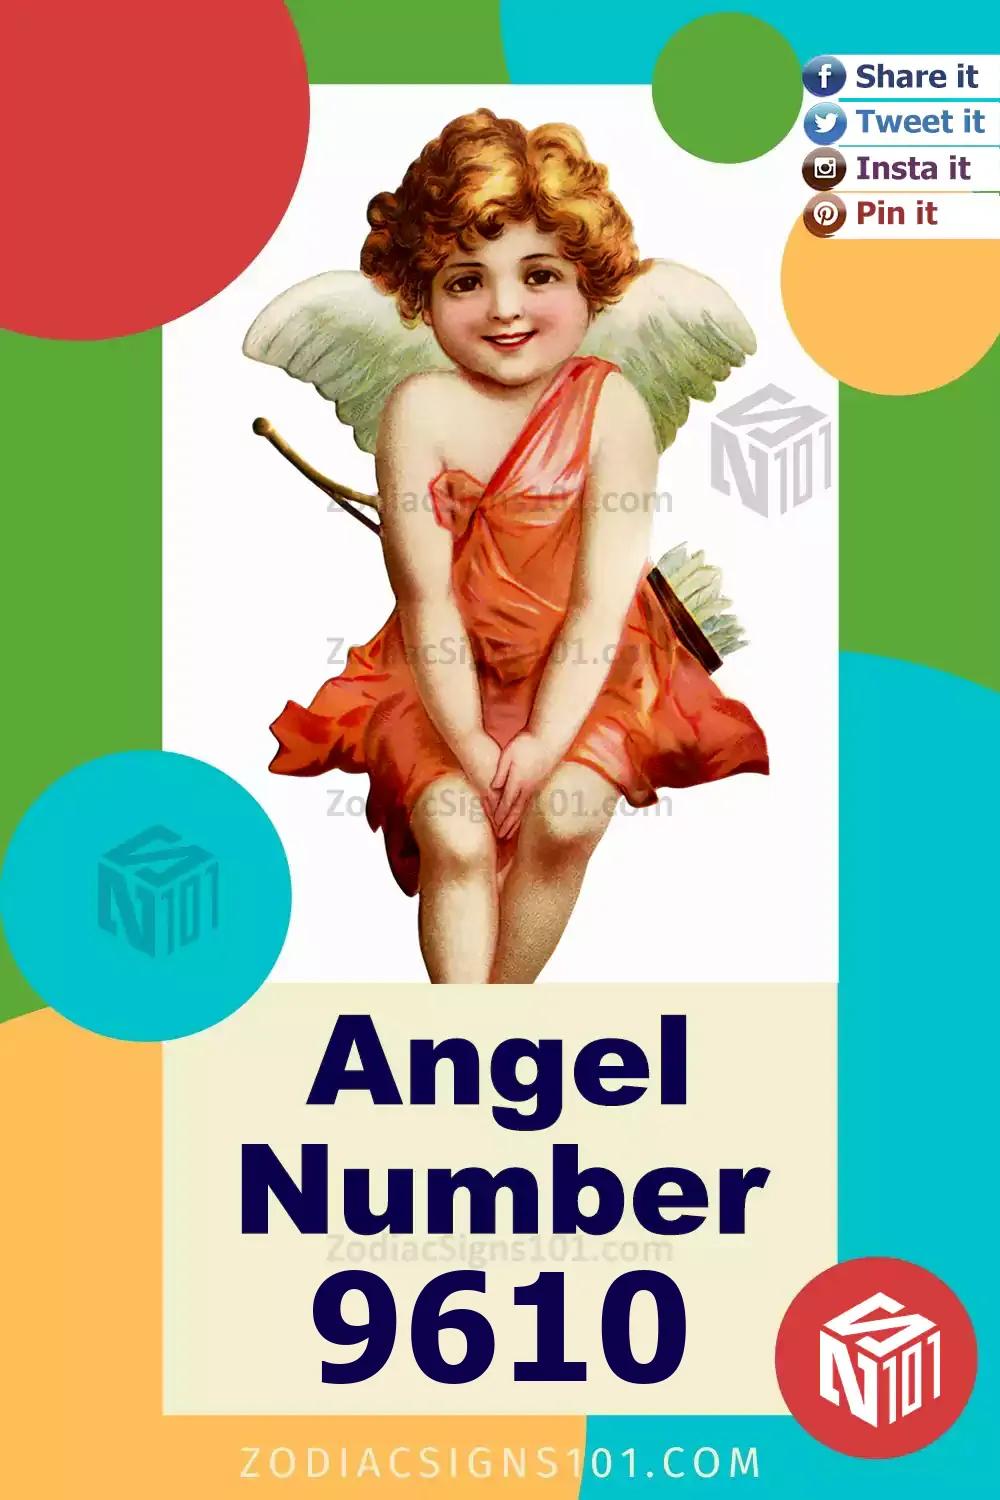 9610 Angel Number Meaning